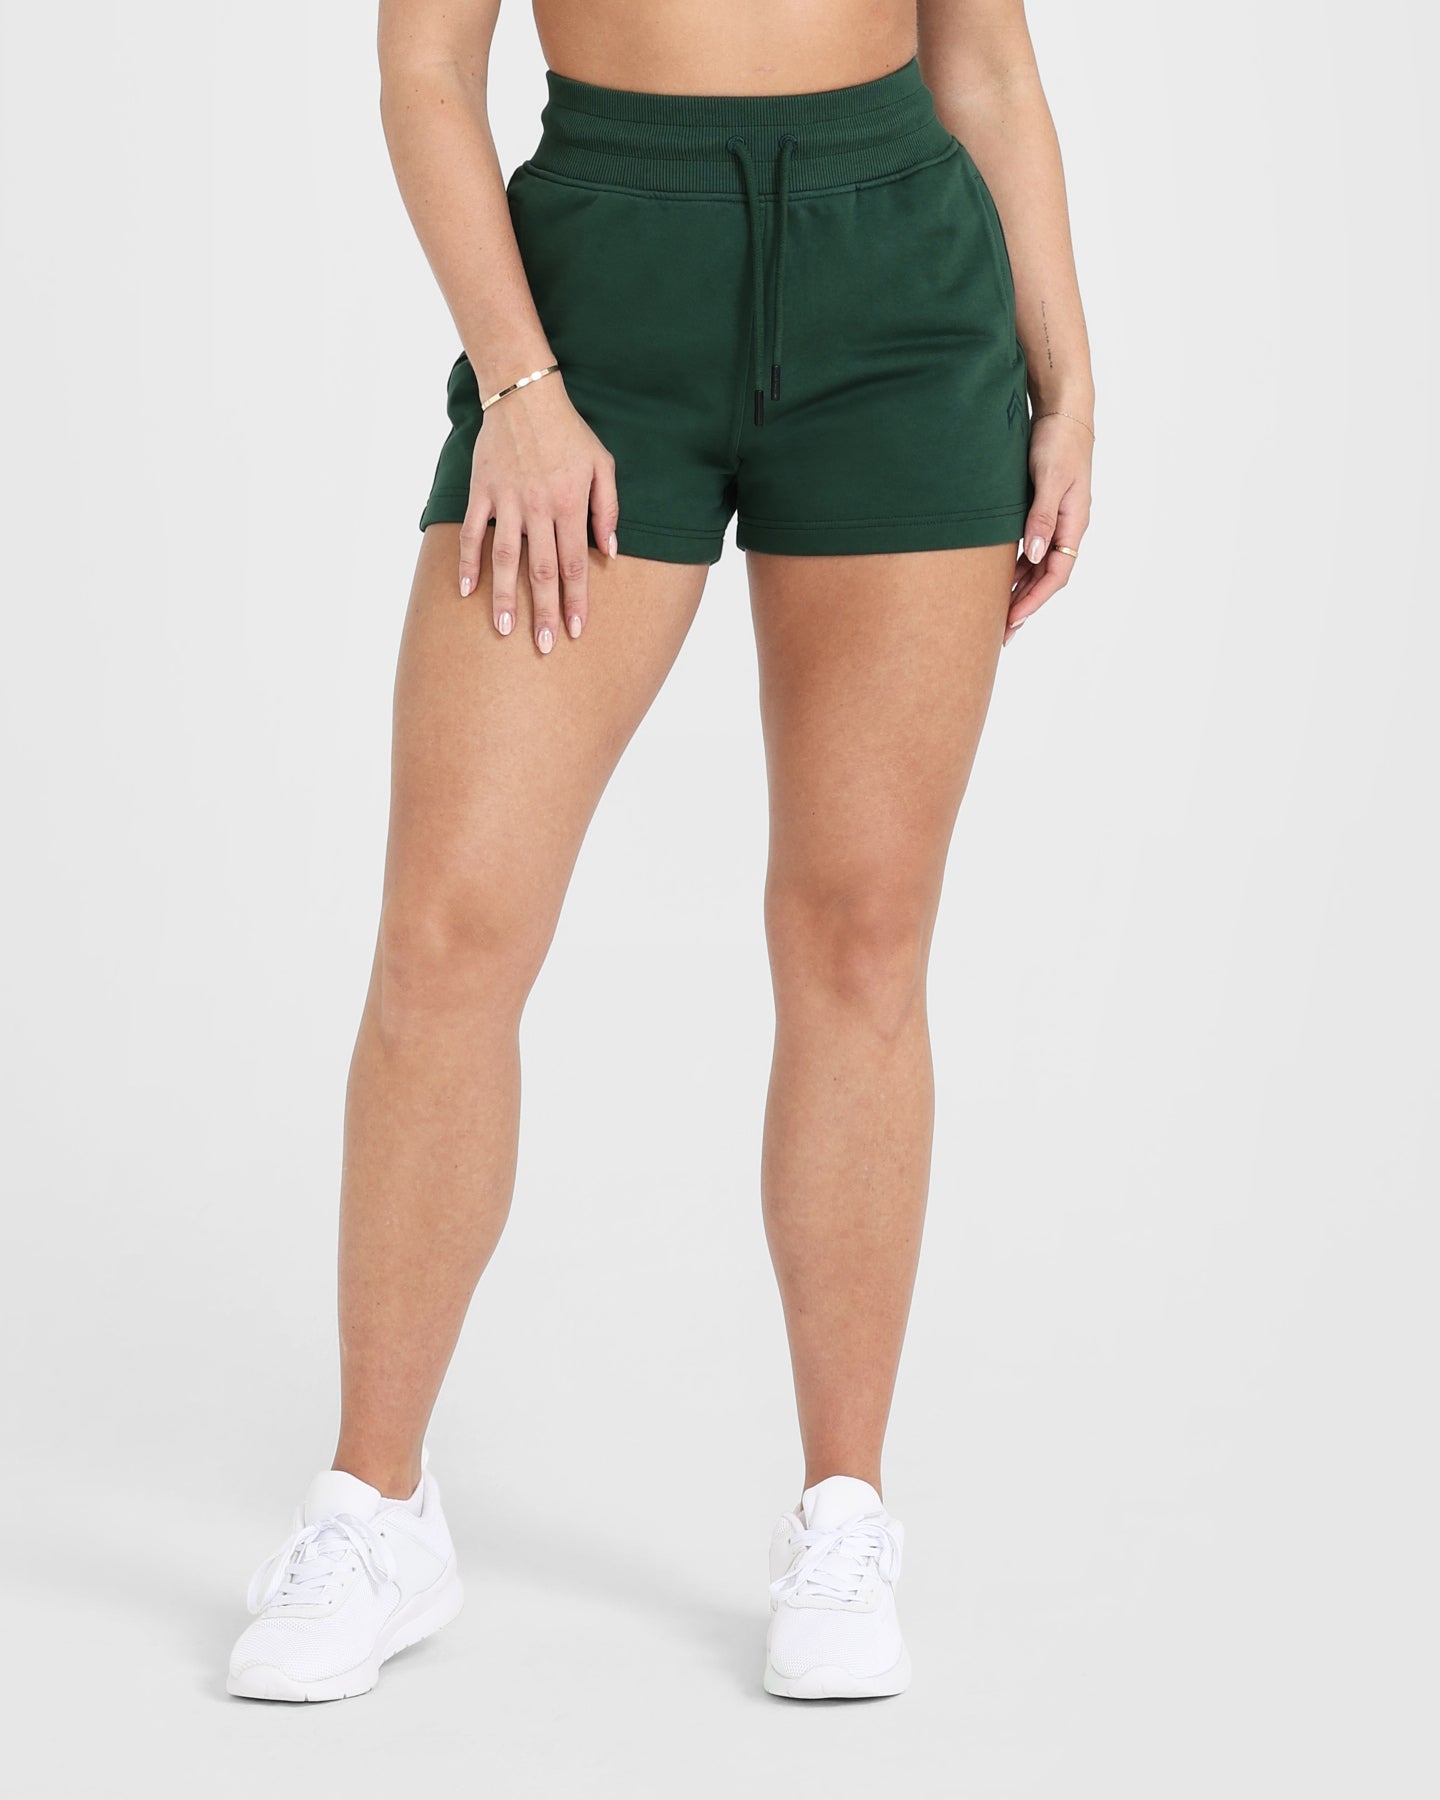 Soft Cotton Shorts Women\'s in Oner Active Evergreen 